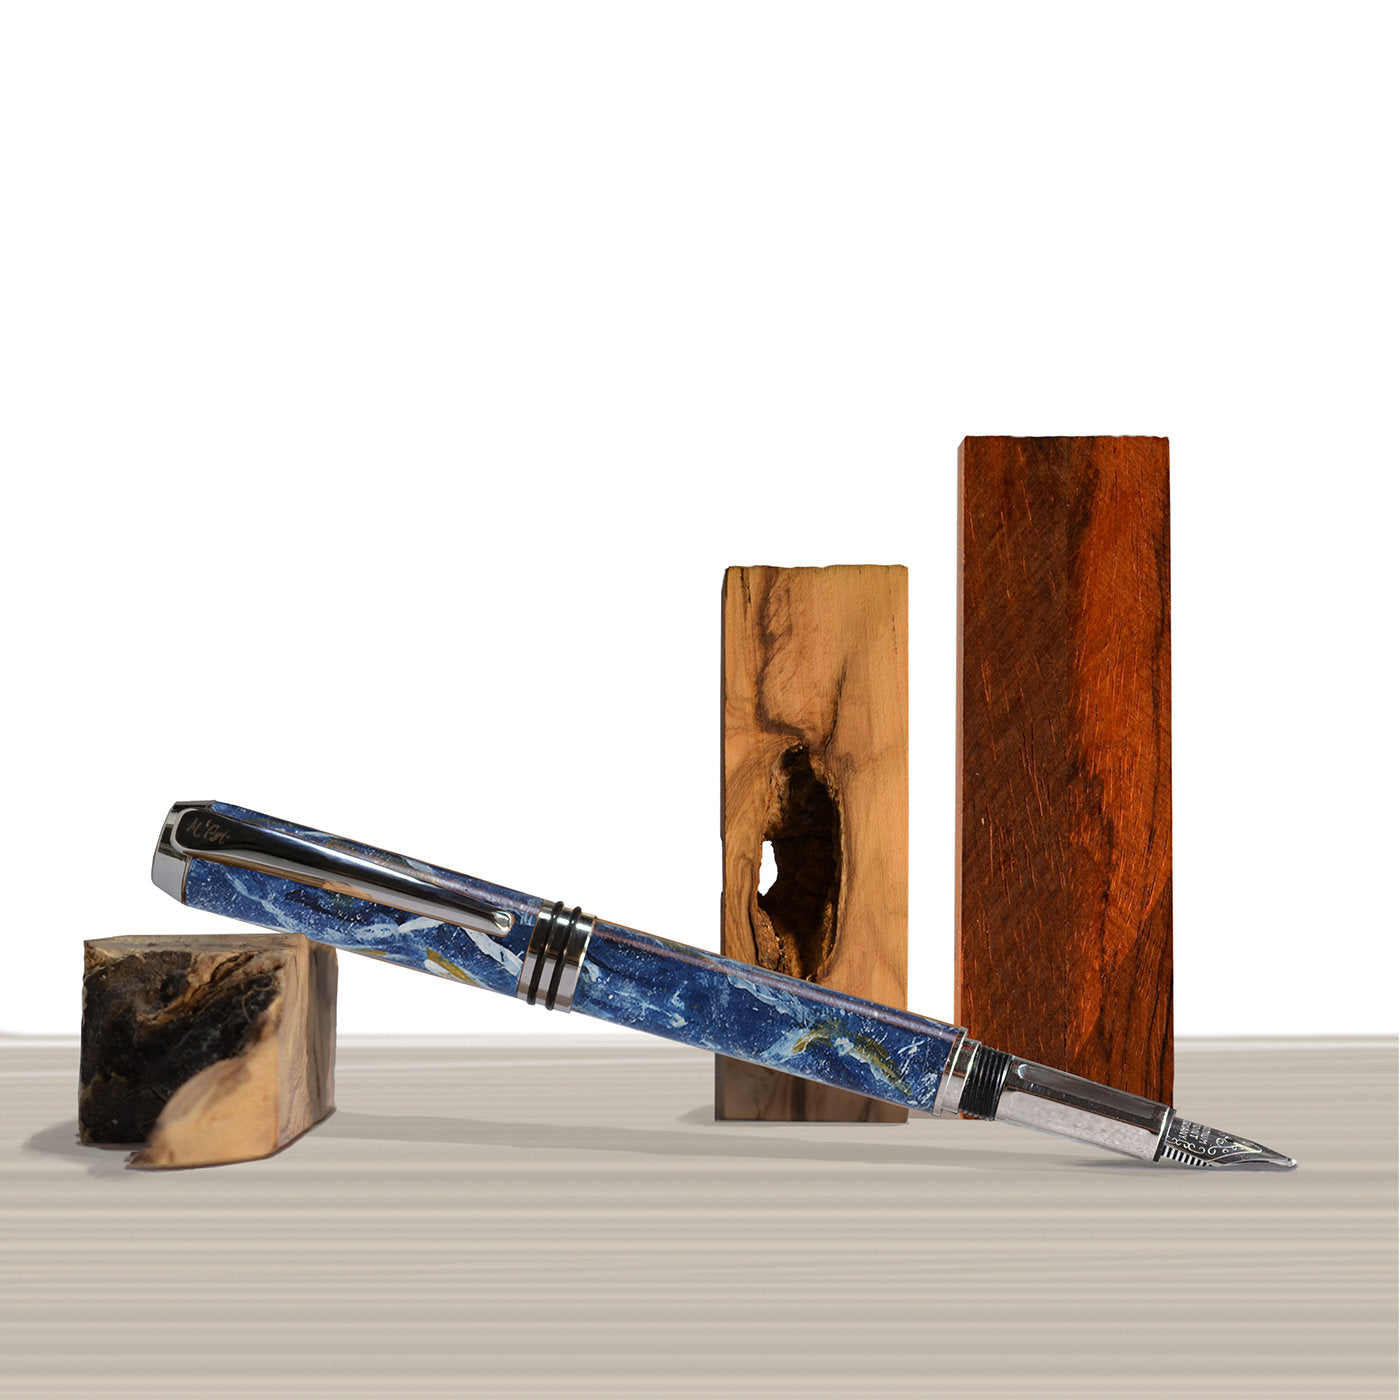 Antea Marbled Blue Fountain Pen in Olive Wood - Alternative view 3